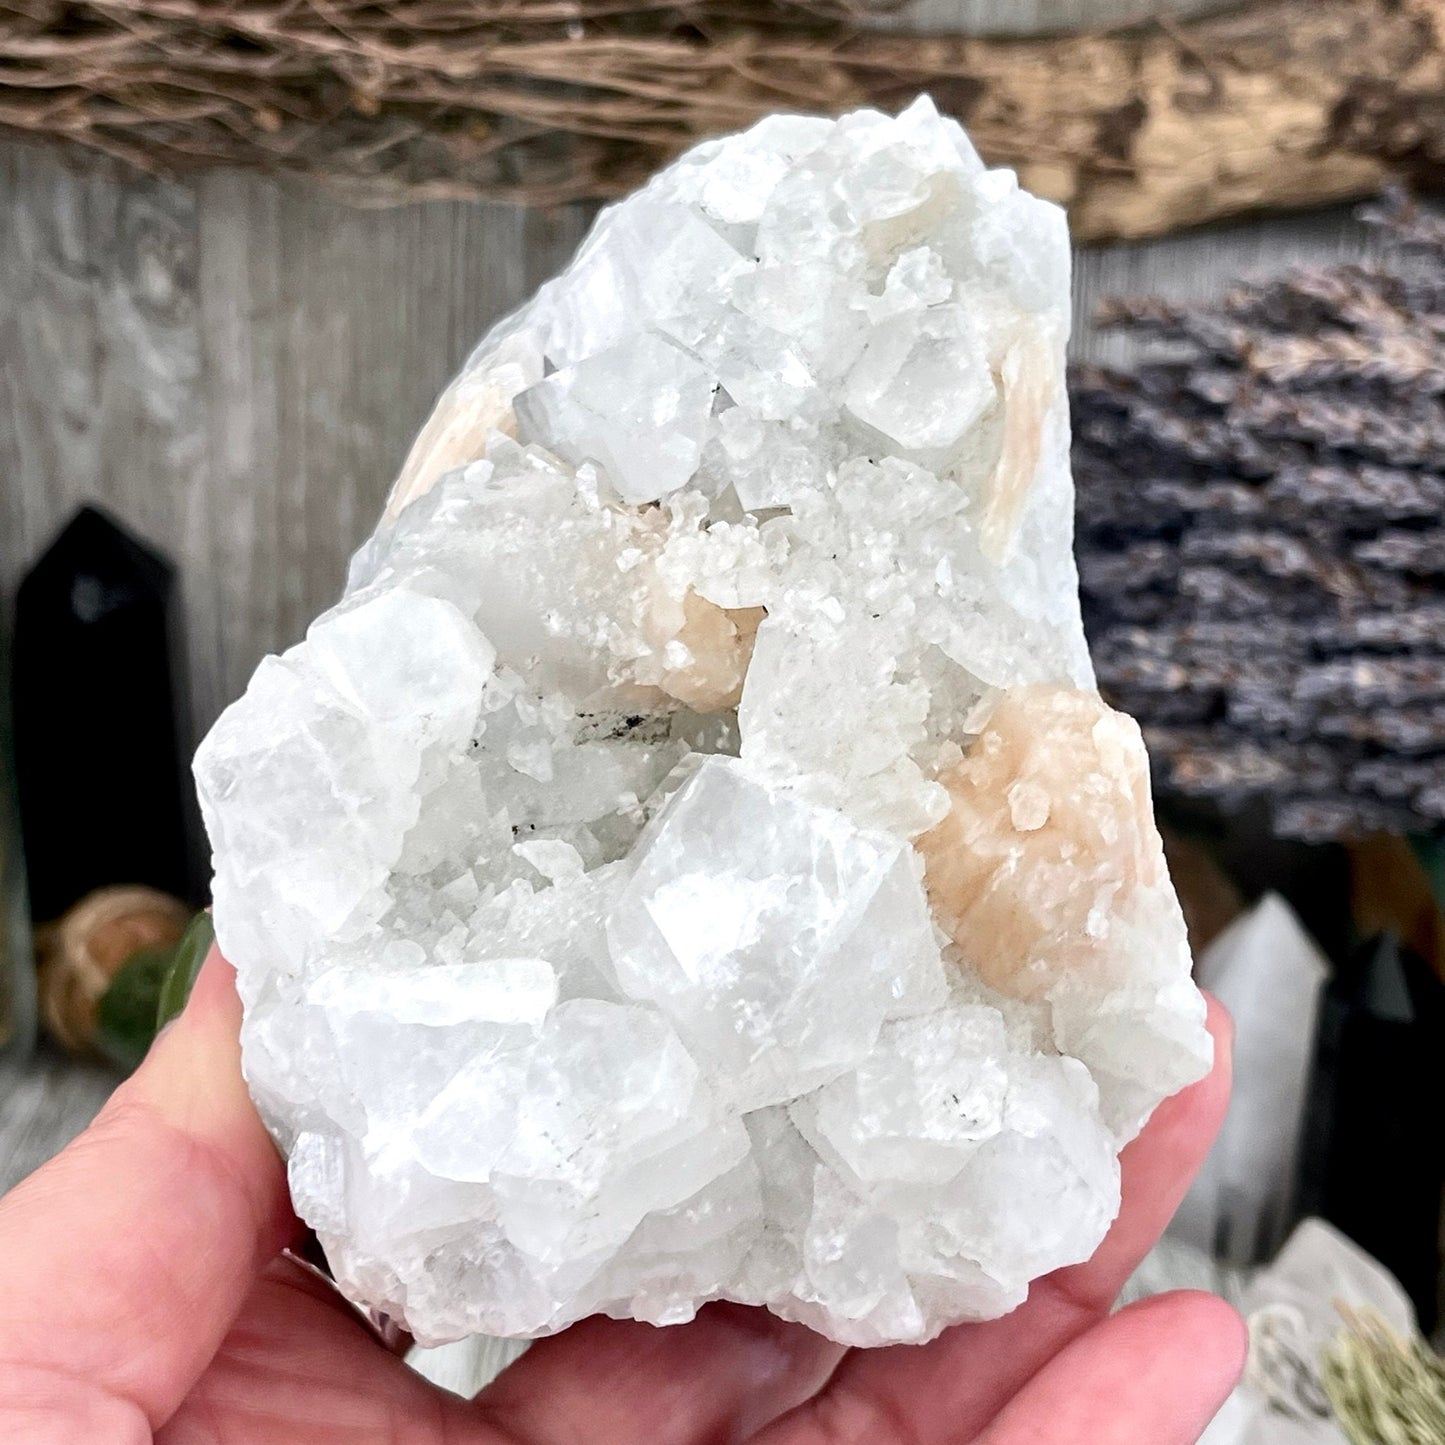 Apophyllite, Big Crystal, Crystal cluster, Crystal Decor, Crystal Geode, Crystal Point, Crystal Sphere, Crystals, Etsy ID: 1620549288, healing crystals, Home & Living, Home Decor, large crystal, raw crystal, Rocks & Geodes